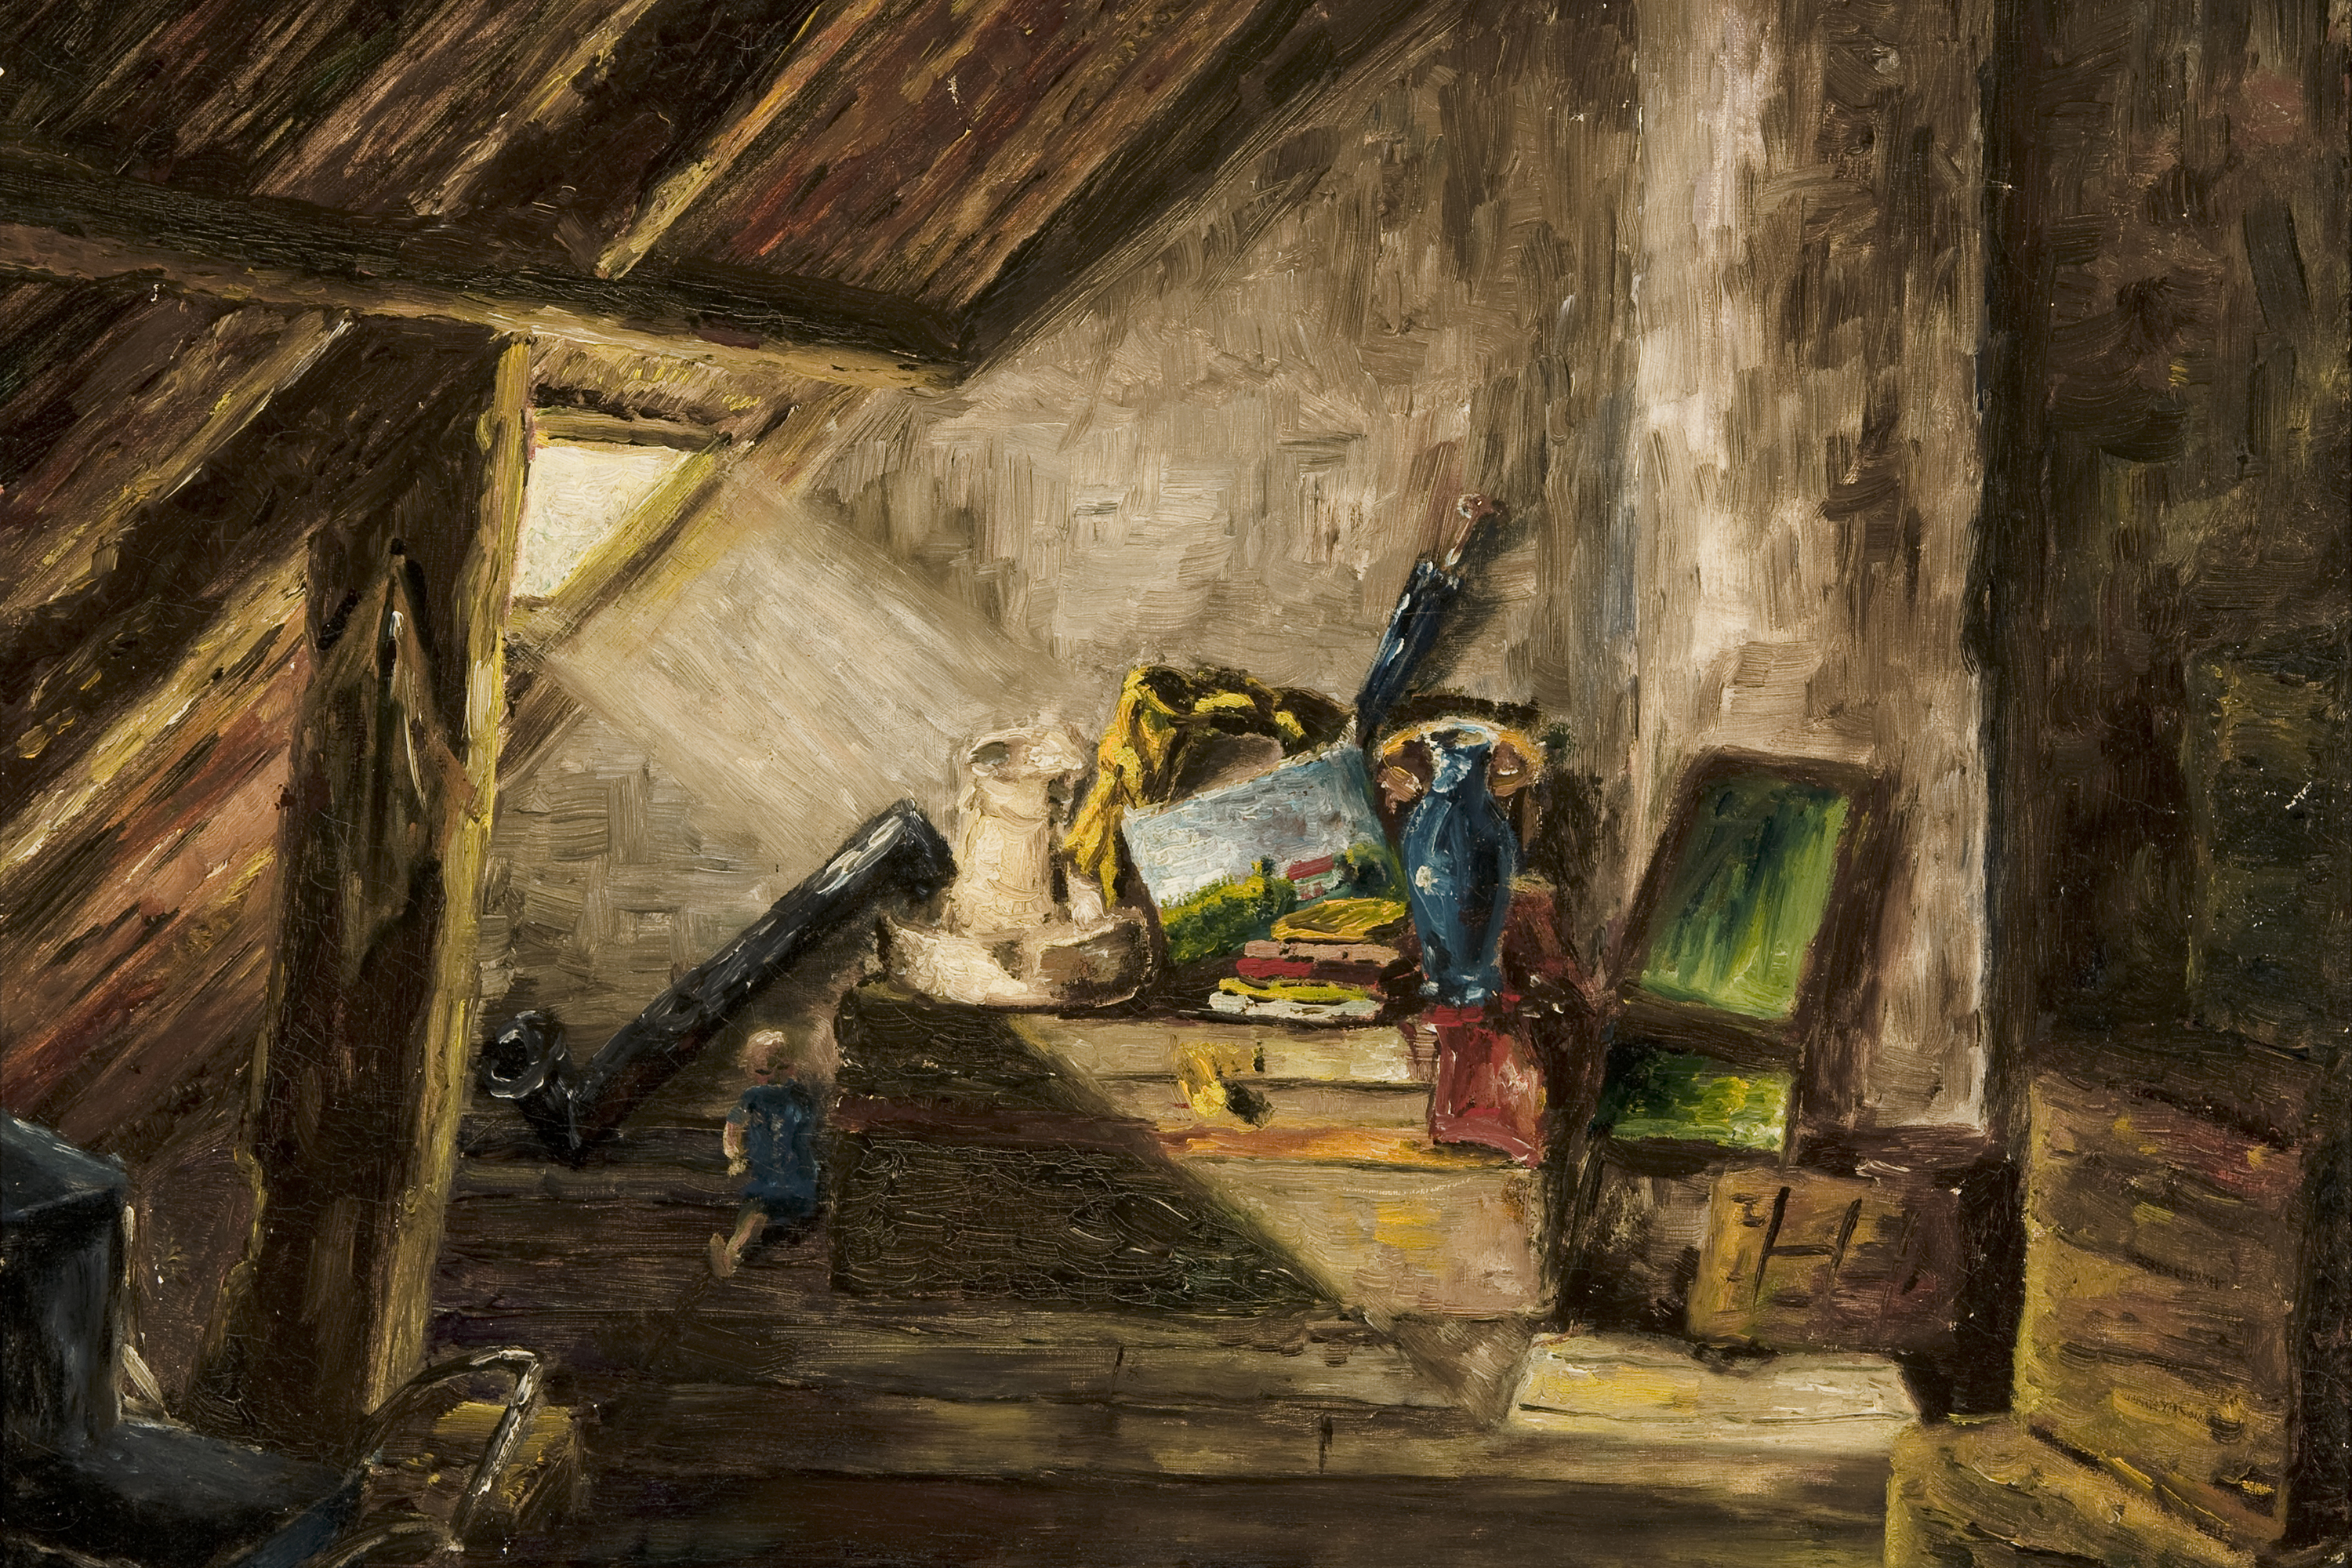 Painting of an attic view drawn by a Jewish teenager while in hiding during the Holocaust. (U.S. Holocaust Memorial Museum, courtesy of Eva Schloss)